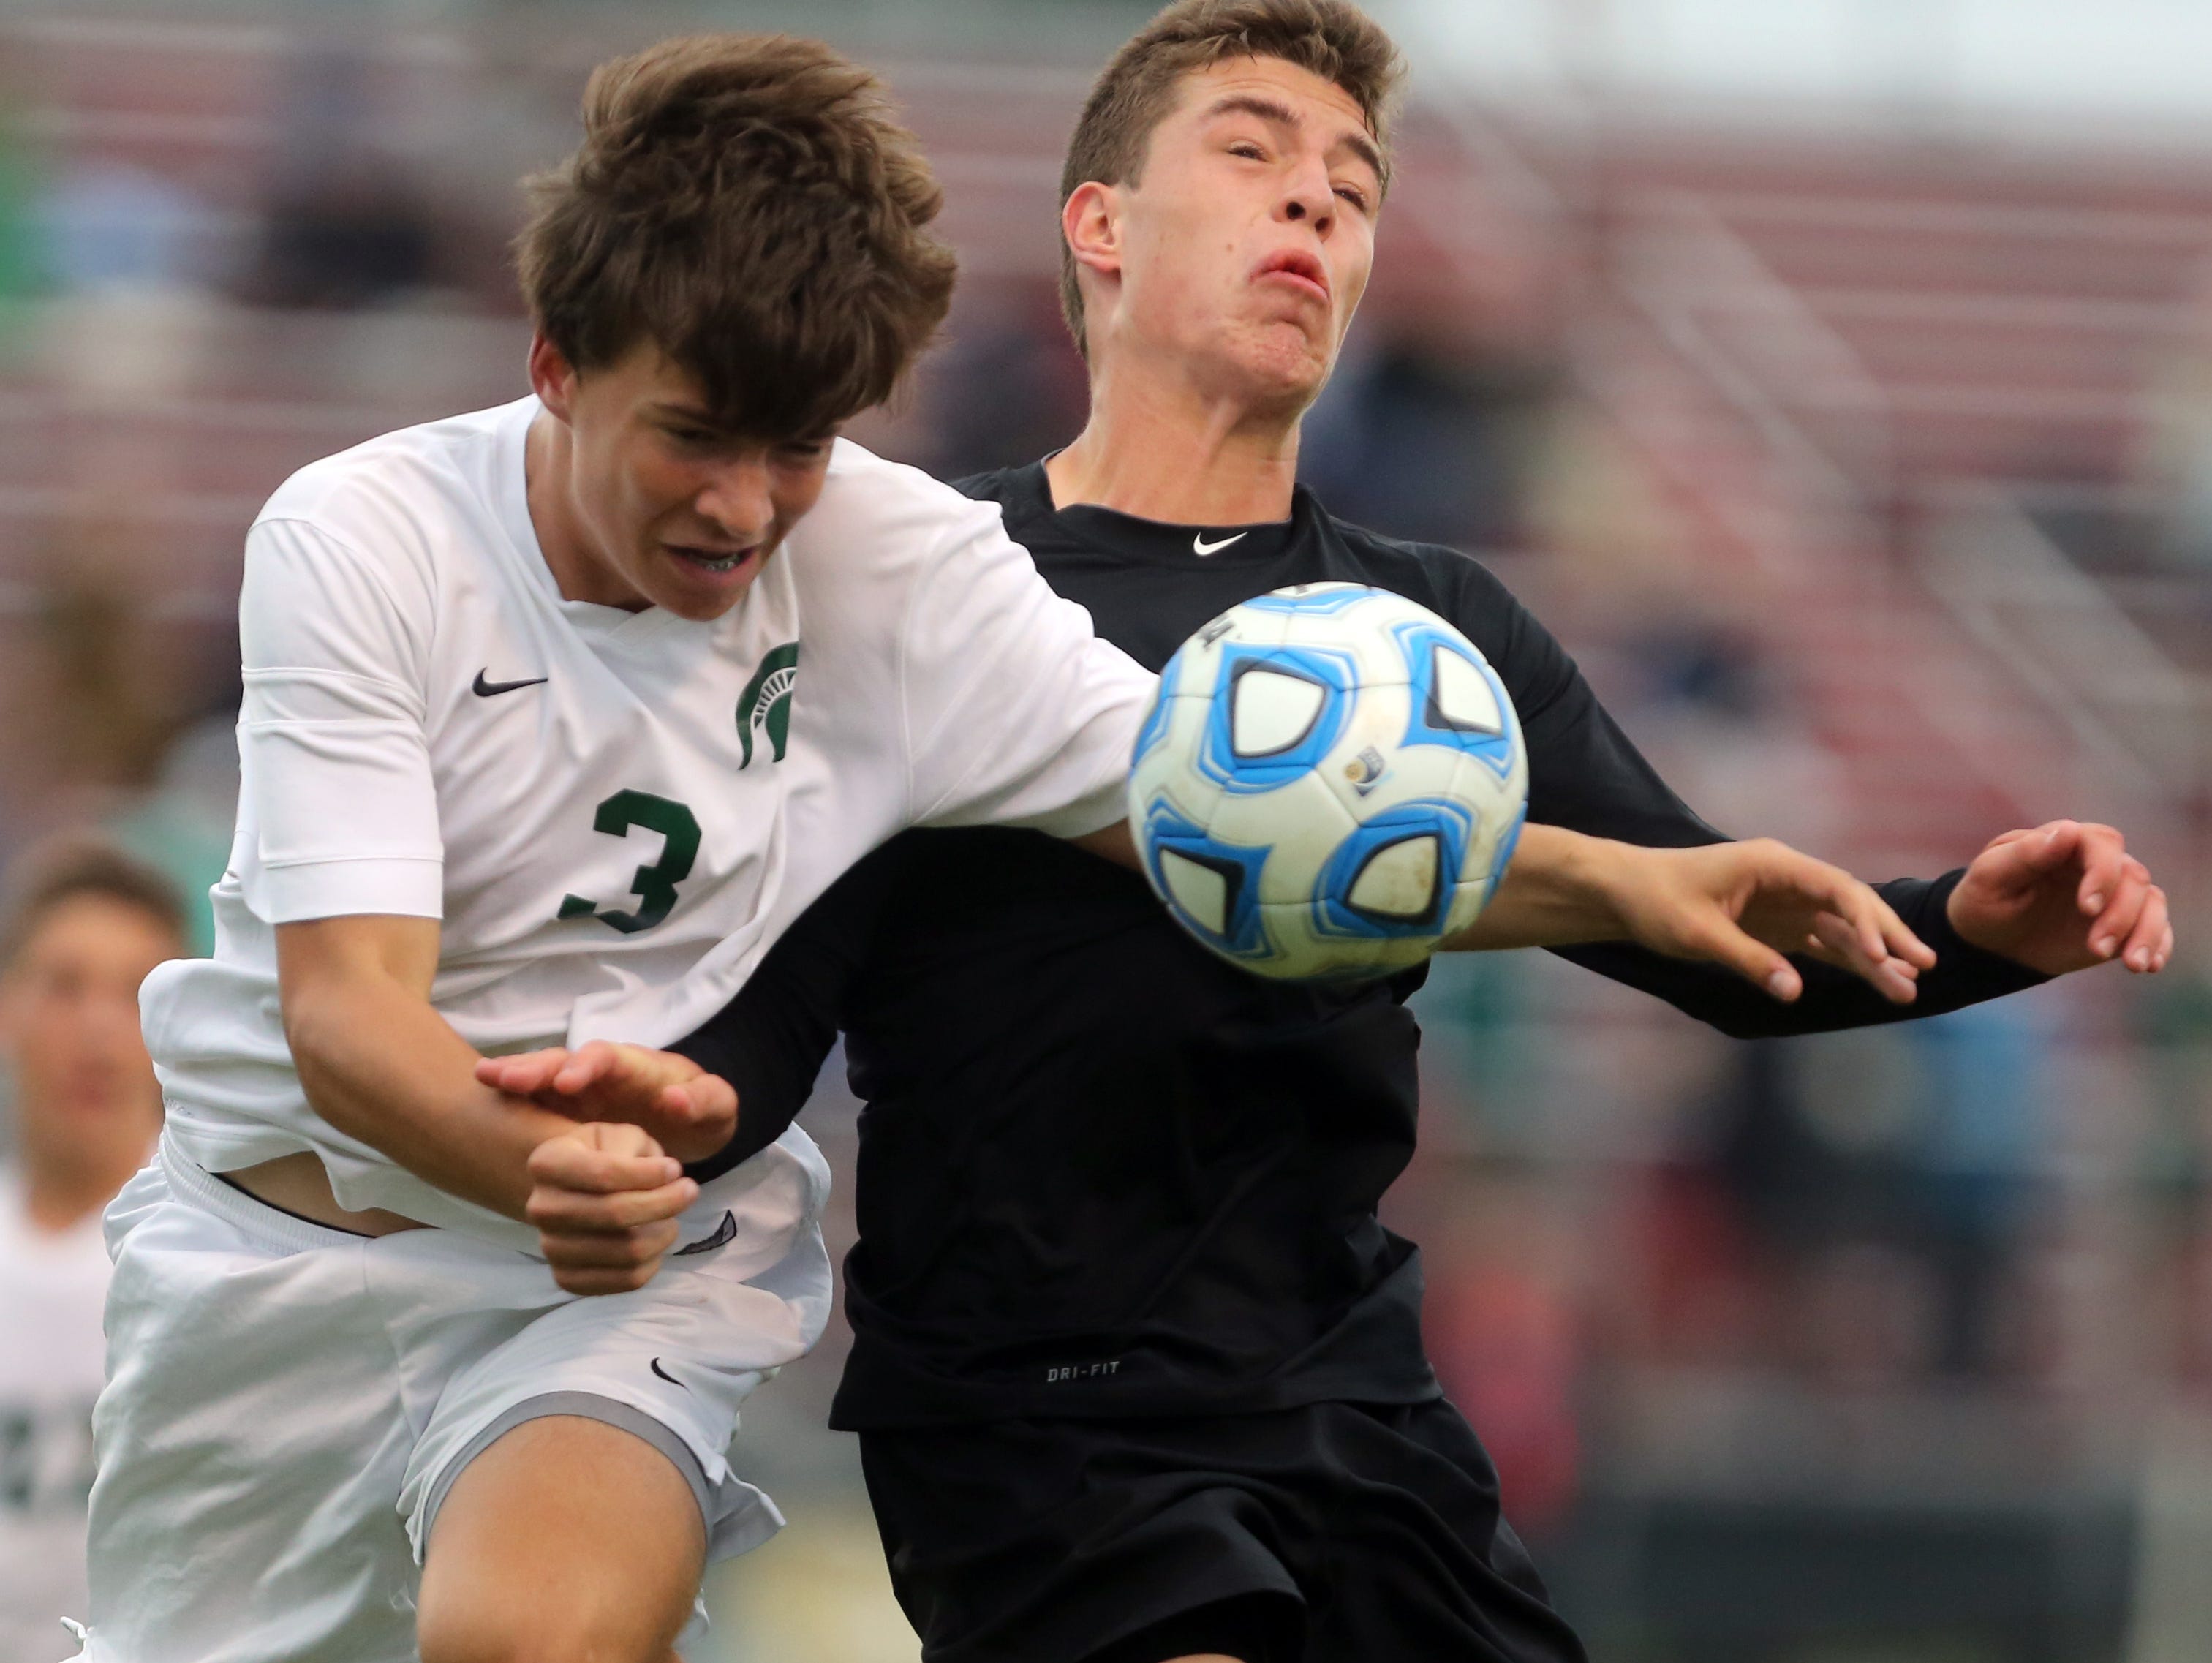 Battle Ground Academy's Jack Arnold fights for control of the ball with Webb School's Guthrie Bouchard-Dean during their Division II Class A soccer state final game.